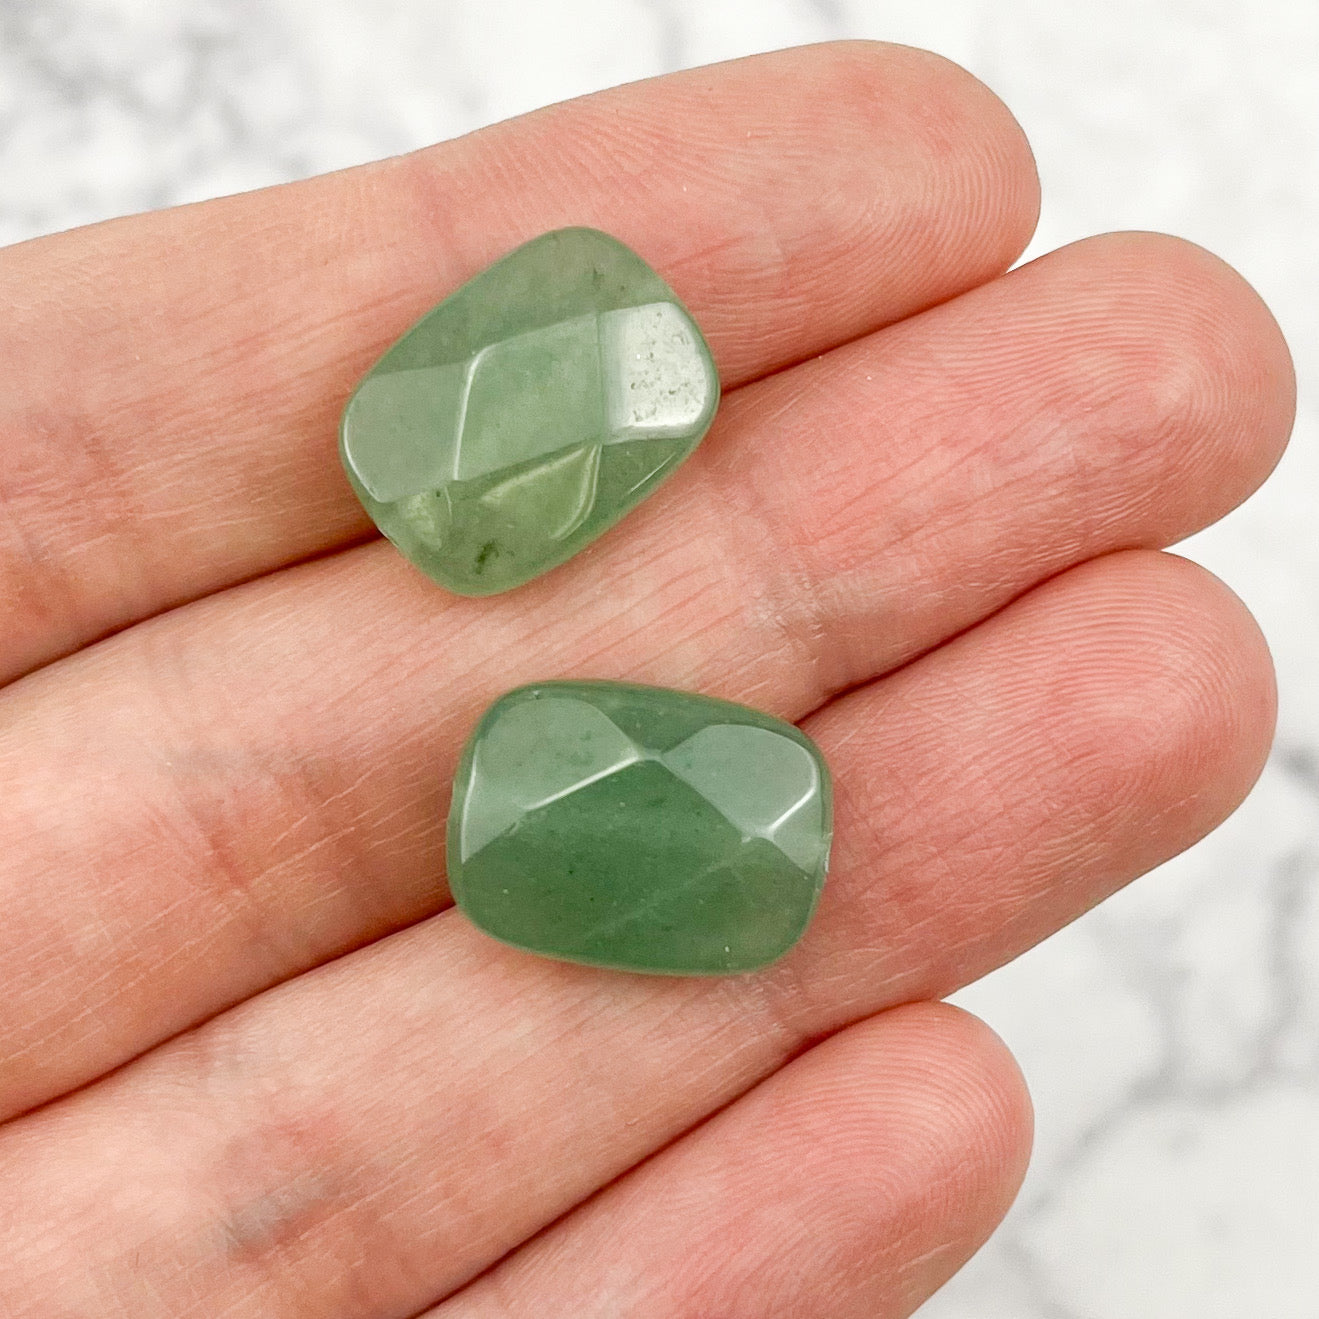 17mm x 13mm Green Aventurine Rectangle Faceted Focal Bead Pack (2 Beads)